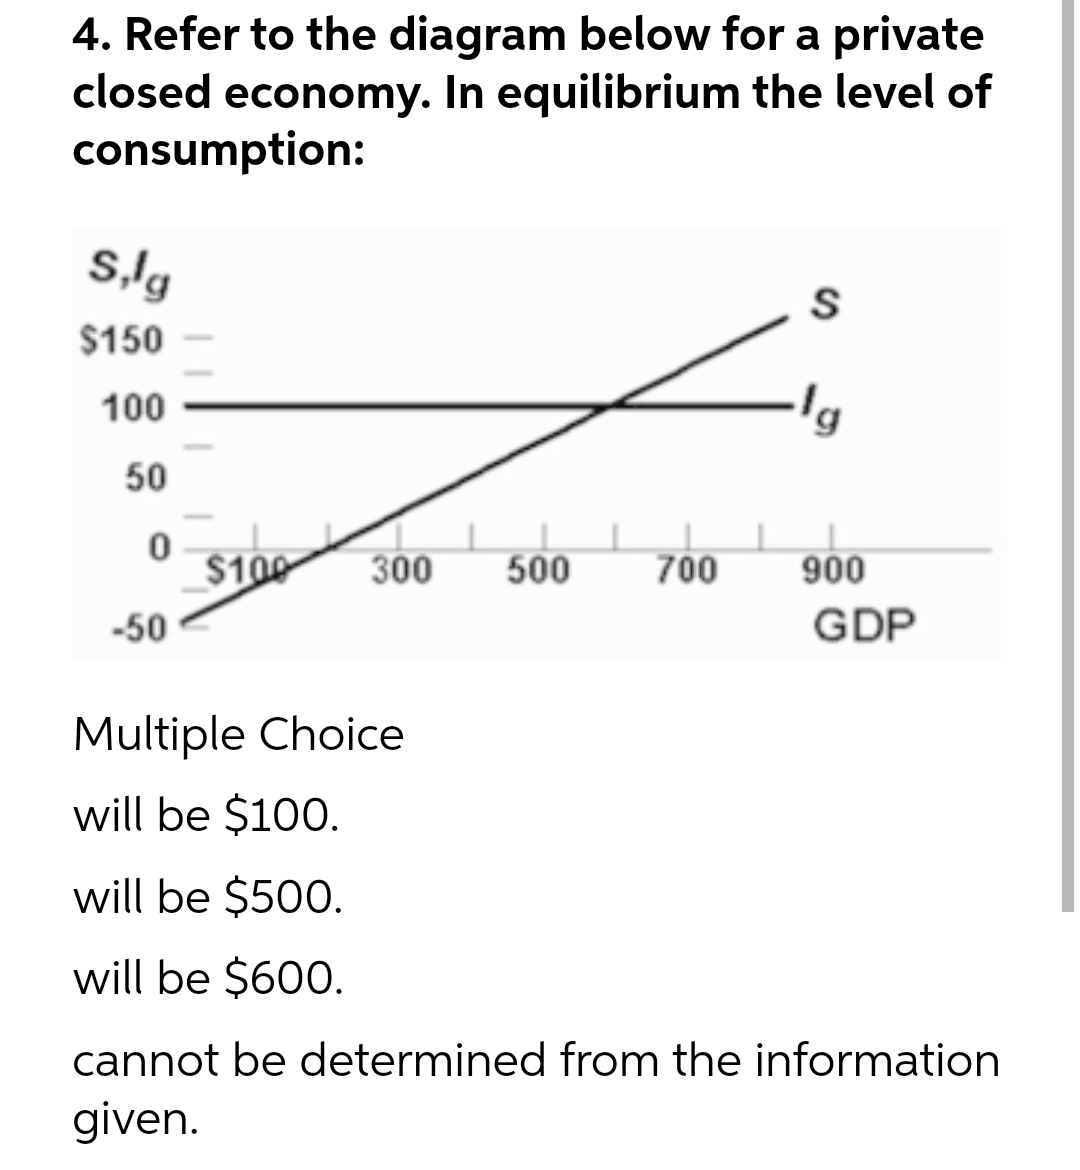 4. Refer to the diagram below for a private
closed economy. In equilibrium the level of
consumption:
S,lg
$150
100
50
-50
$100
300 500
Multiple Choice
will be $100.
will be $500.
will be $600.
700
S
900
GDP
cannot be determined from the information
given.